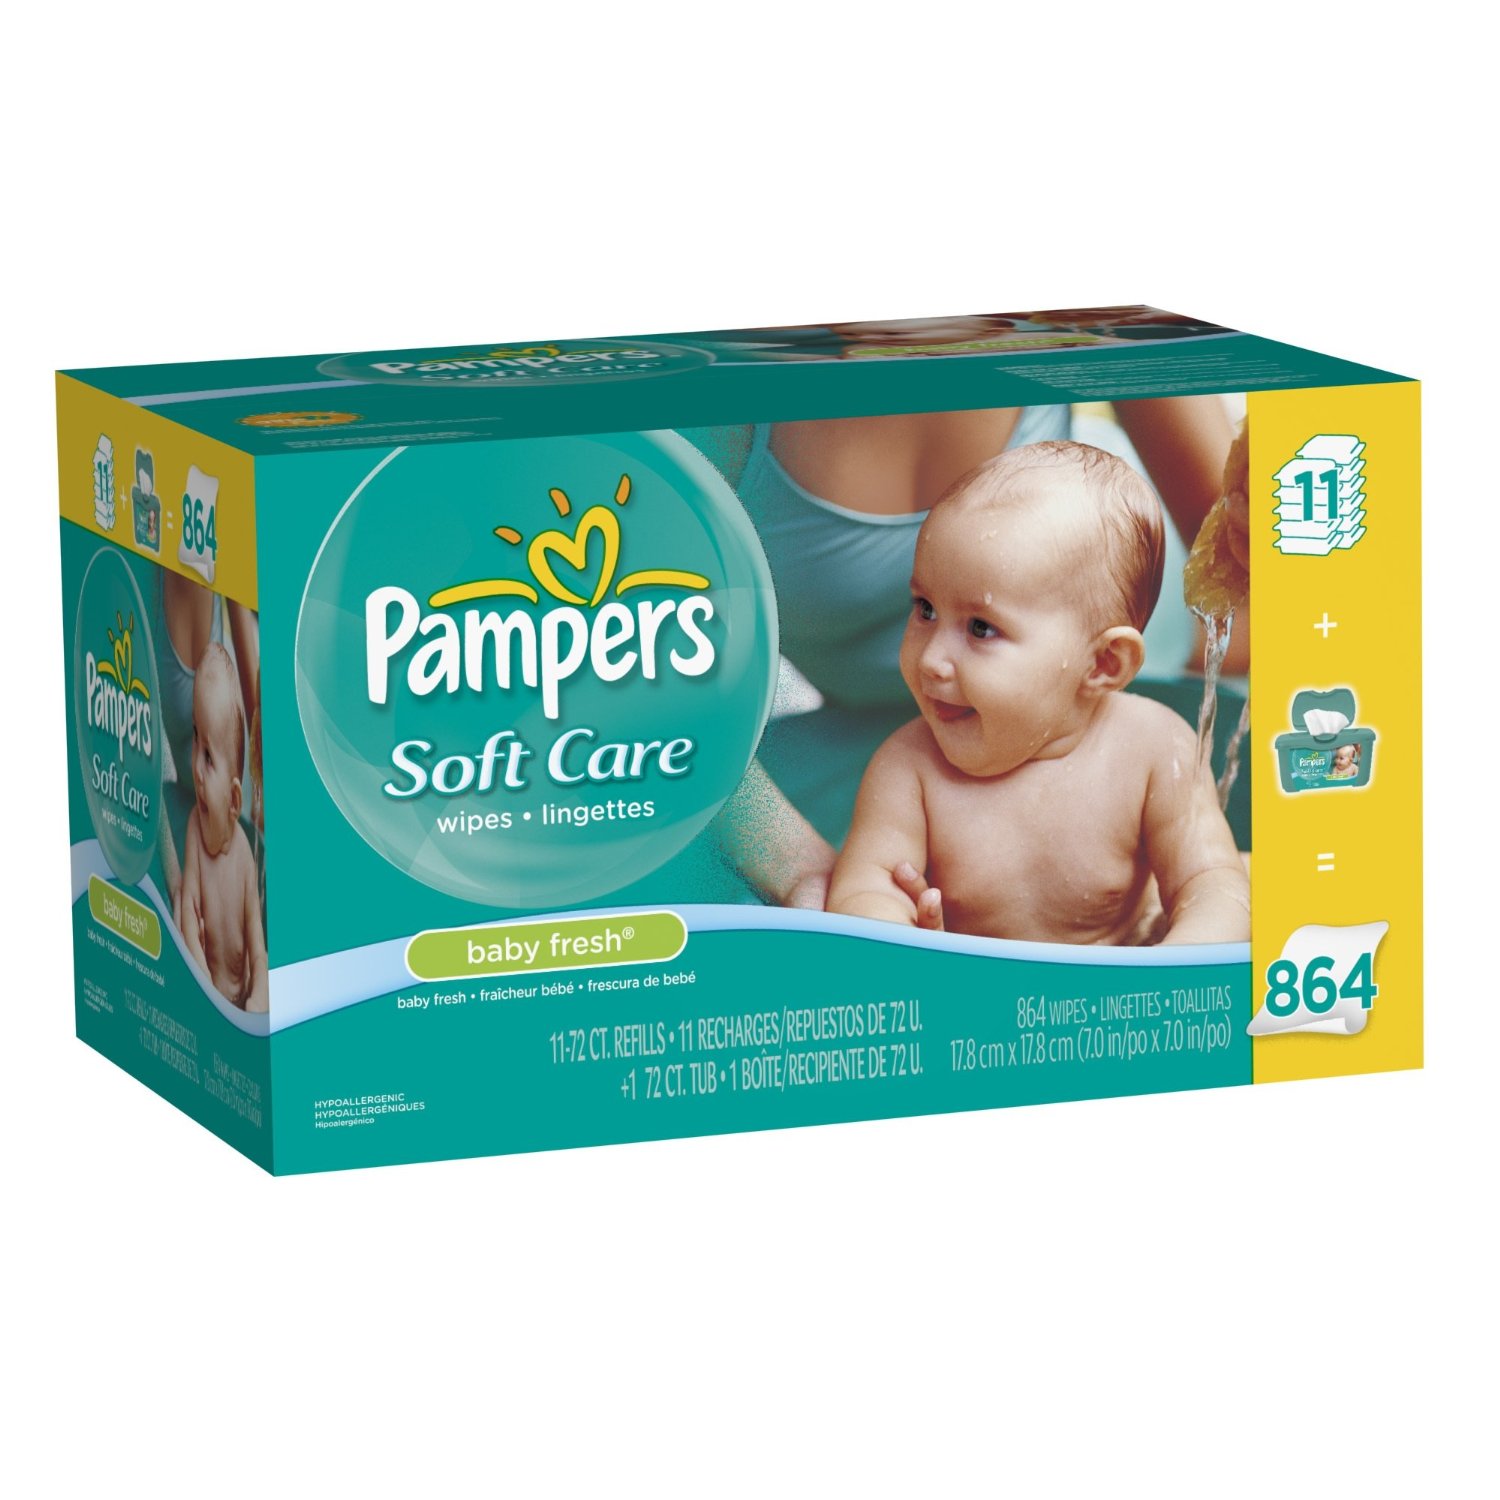 Amazon HOT Pampers Wipes deal for only $0.01 each!!! - Living Chic Mom